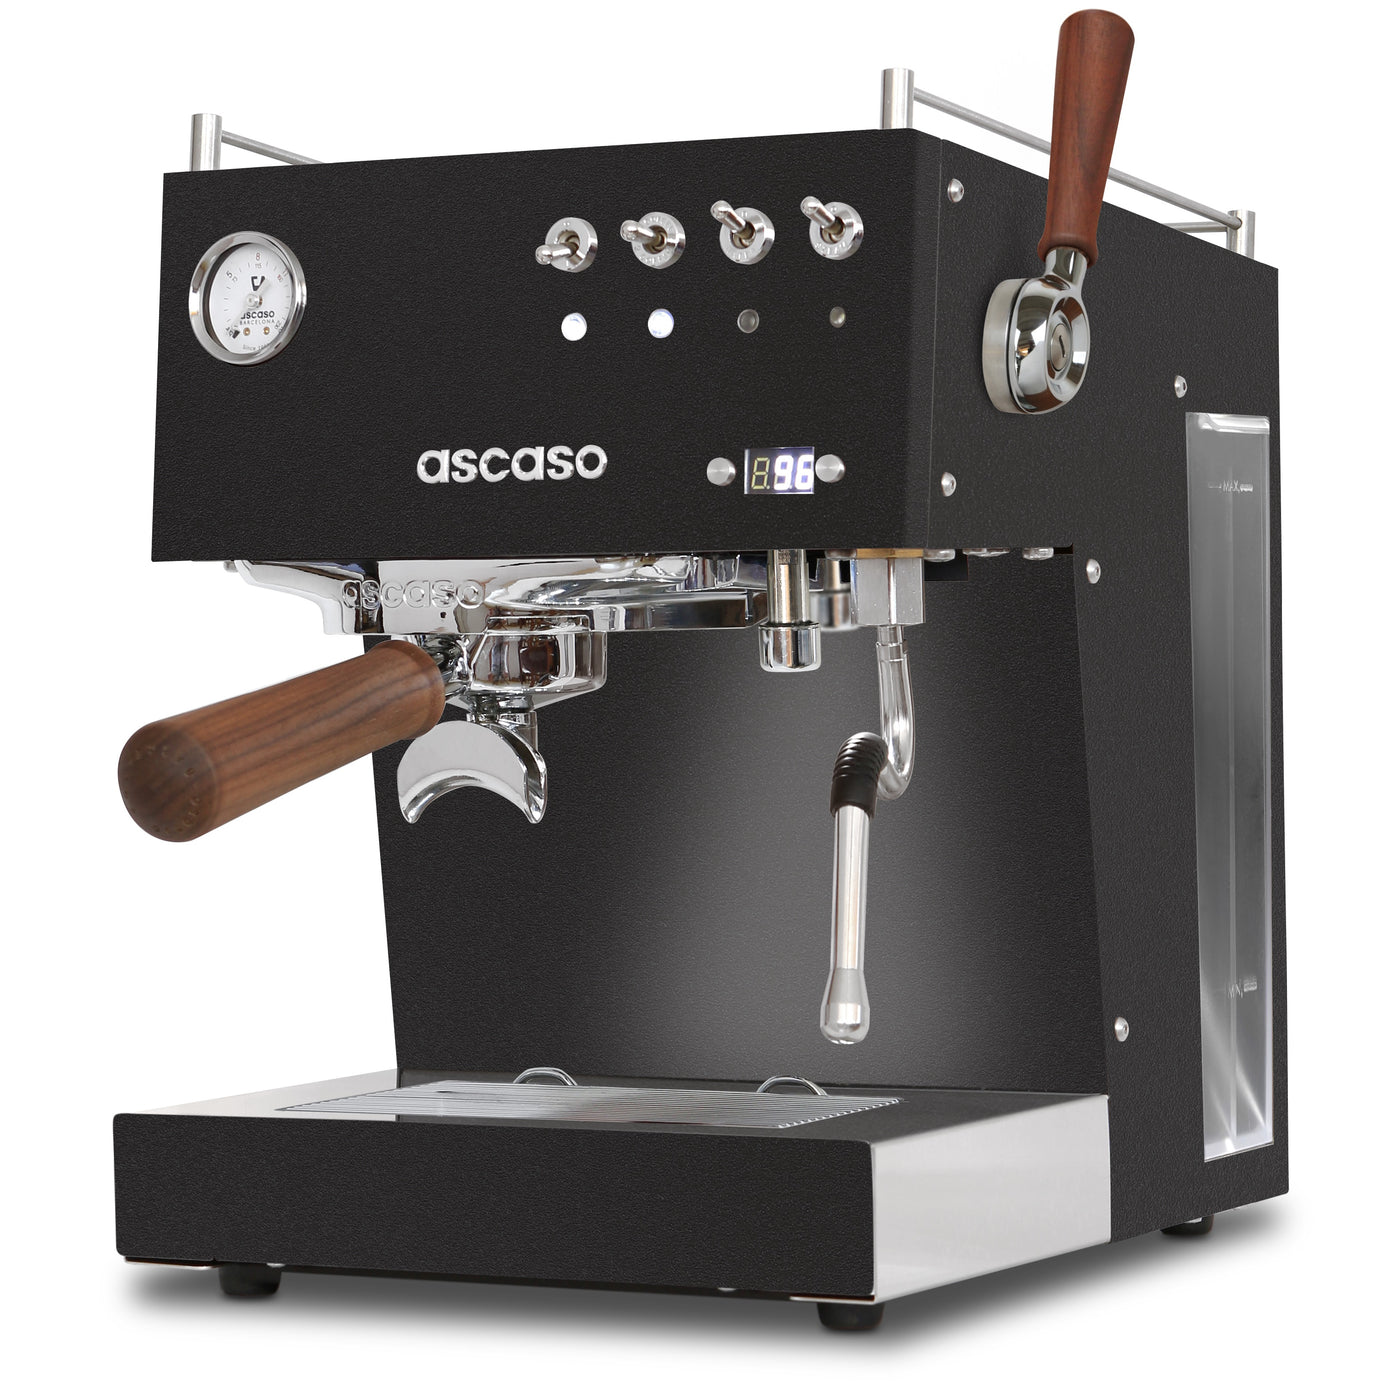 Ascaso Steel Duo Plus in Black and Walnut wood - view from the front right corner of the Espresso machine